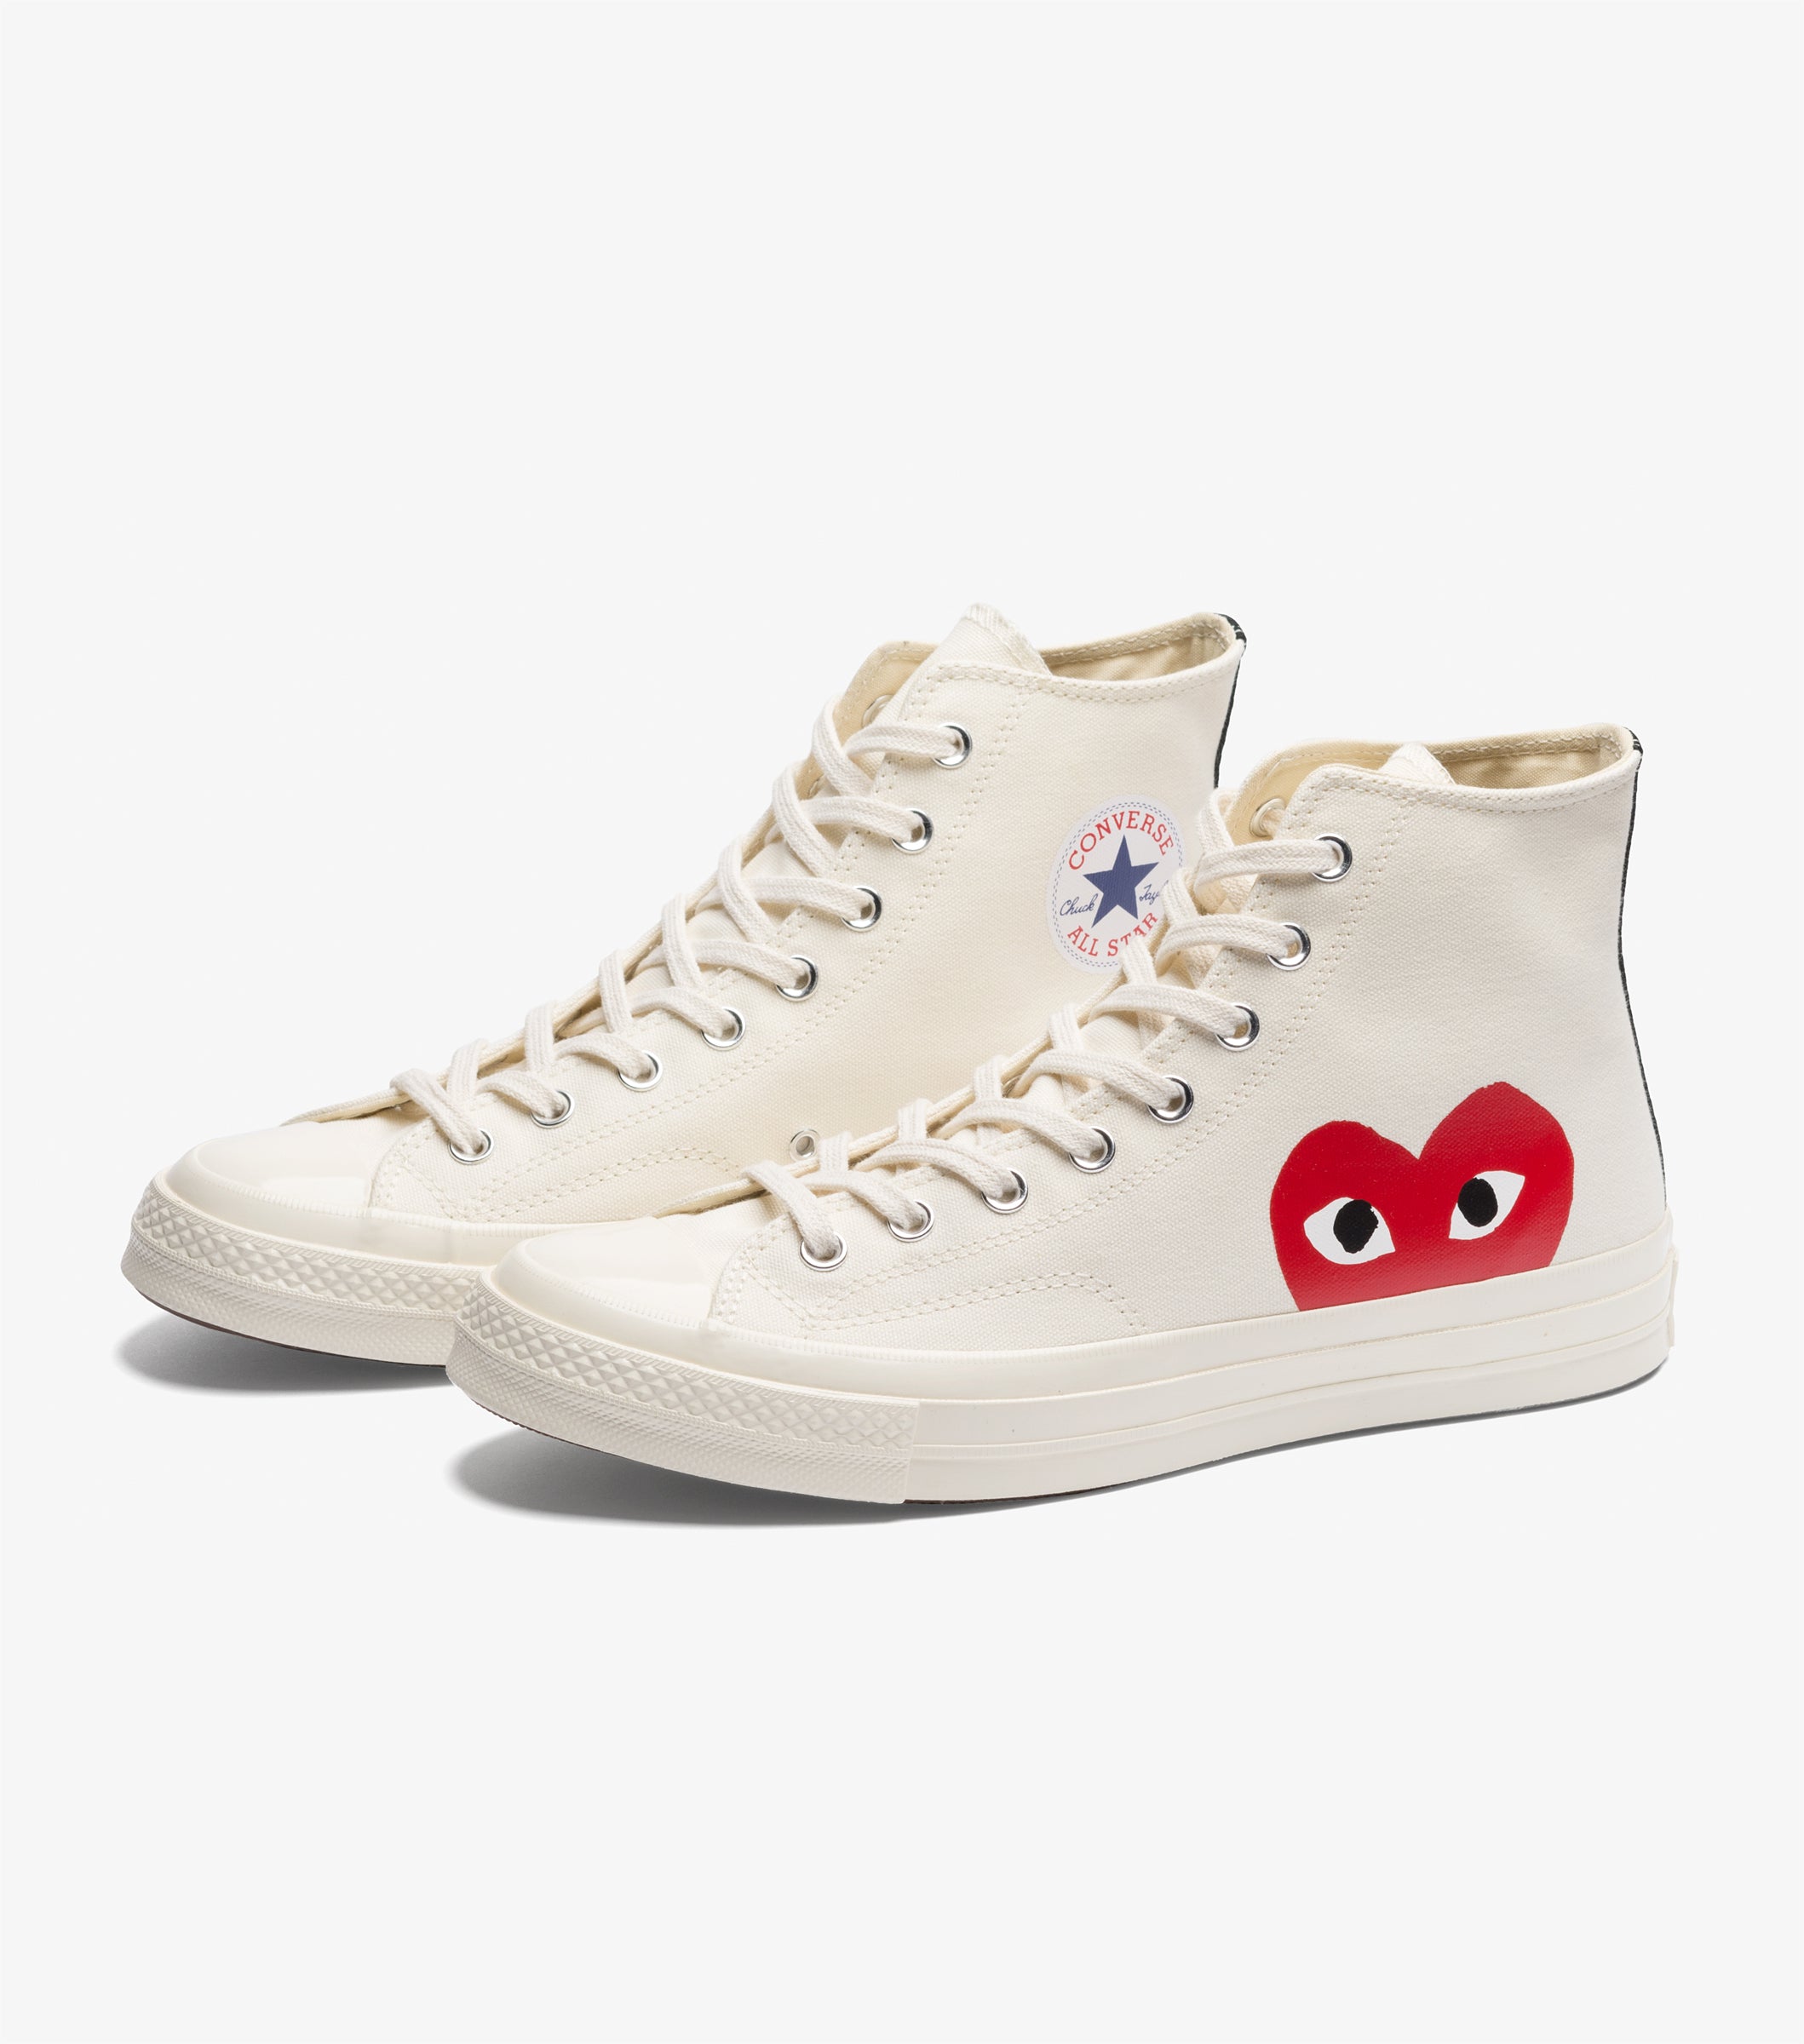 CONVERSE X CDG PLAY CT 70 Hi (Milk/White) – Bows and Arrows